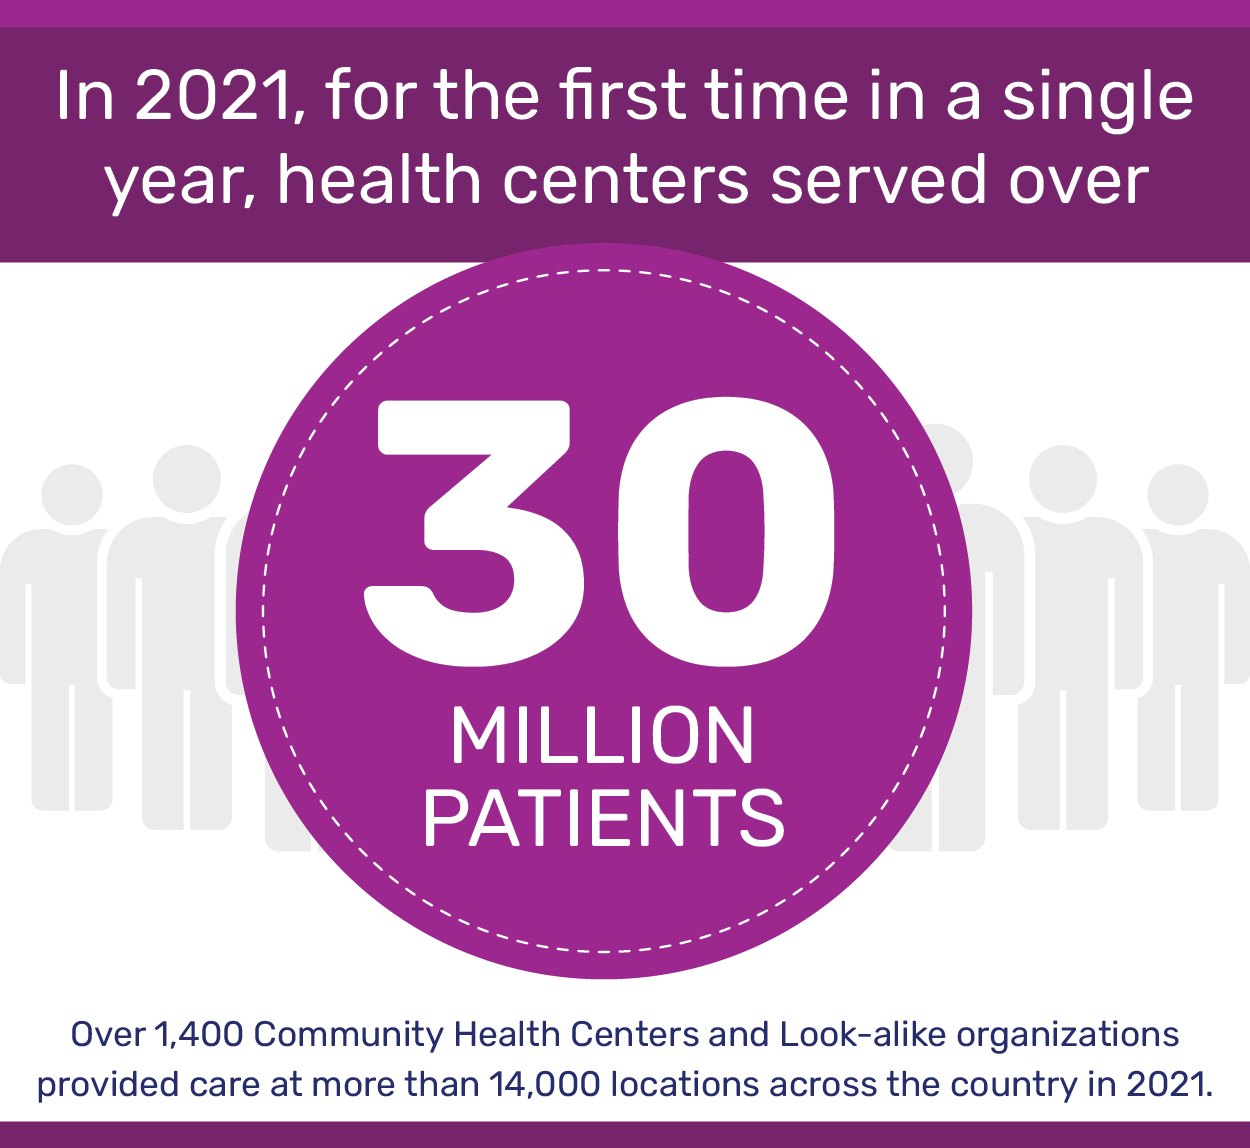 In 2021, for the first time in a single year, health centers served over 30 million patients.